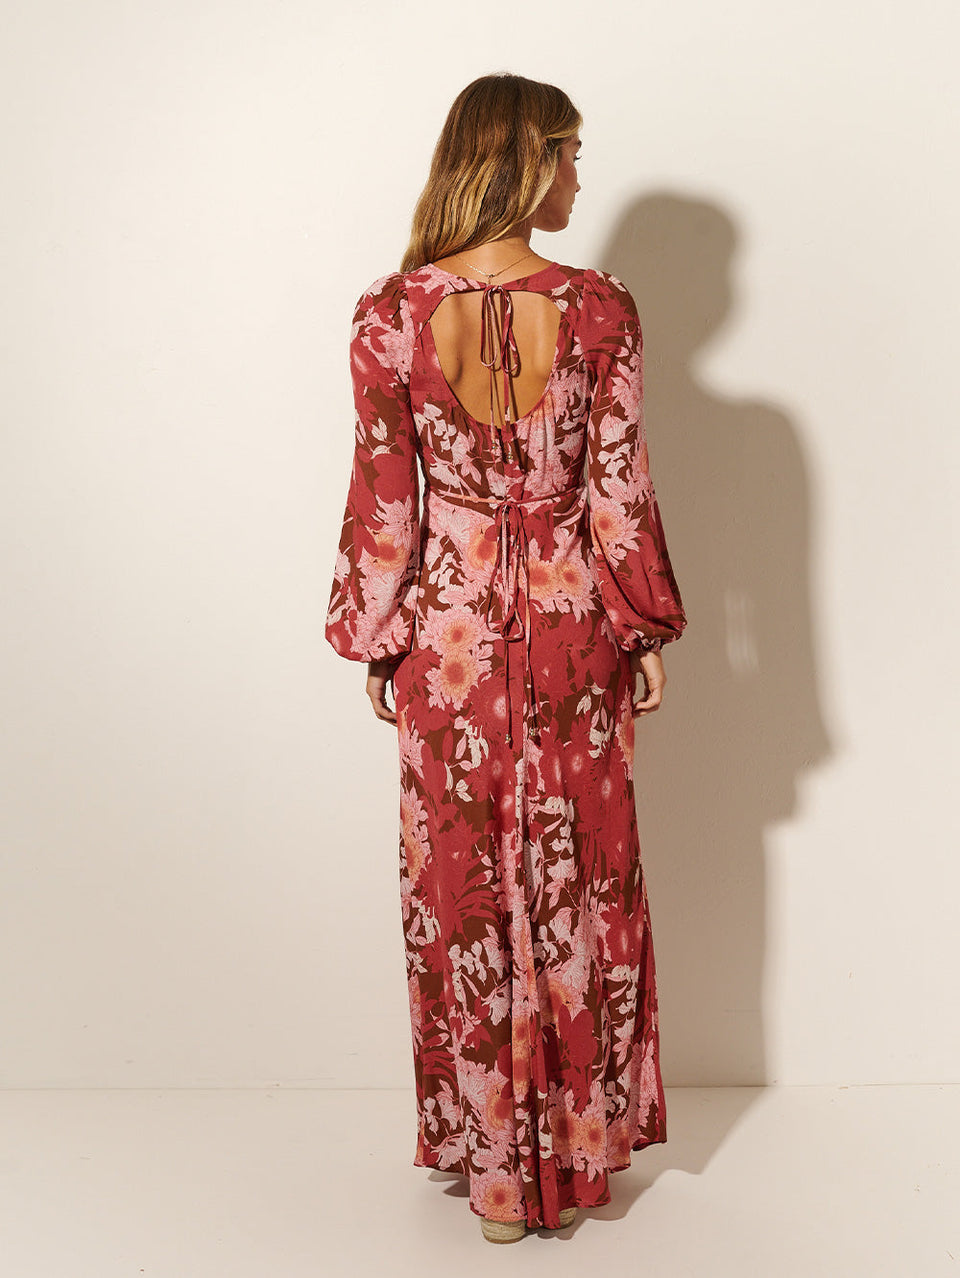 Back shot: Studio model wears KIVARI Hacienda Tie Back Maxi Dress: A red, pink and brown floral dress crafted from sustainable LENZING Viscose Crepe in a bias cut with underbust seams, long sleeves and cut-out back with keyhole ties.